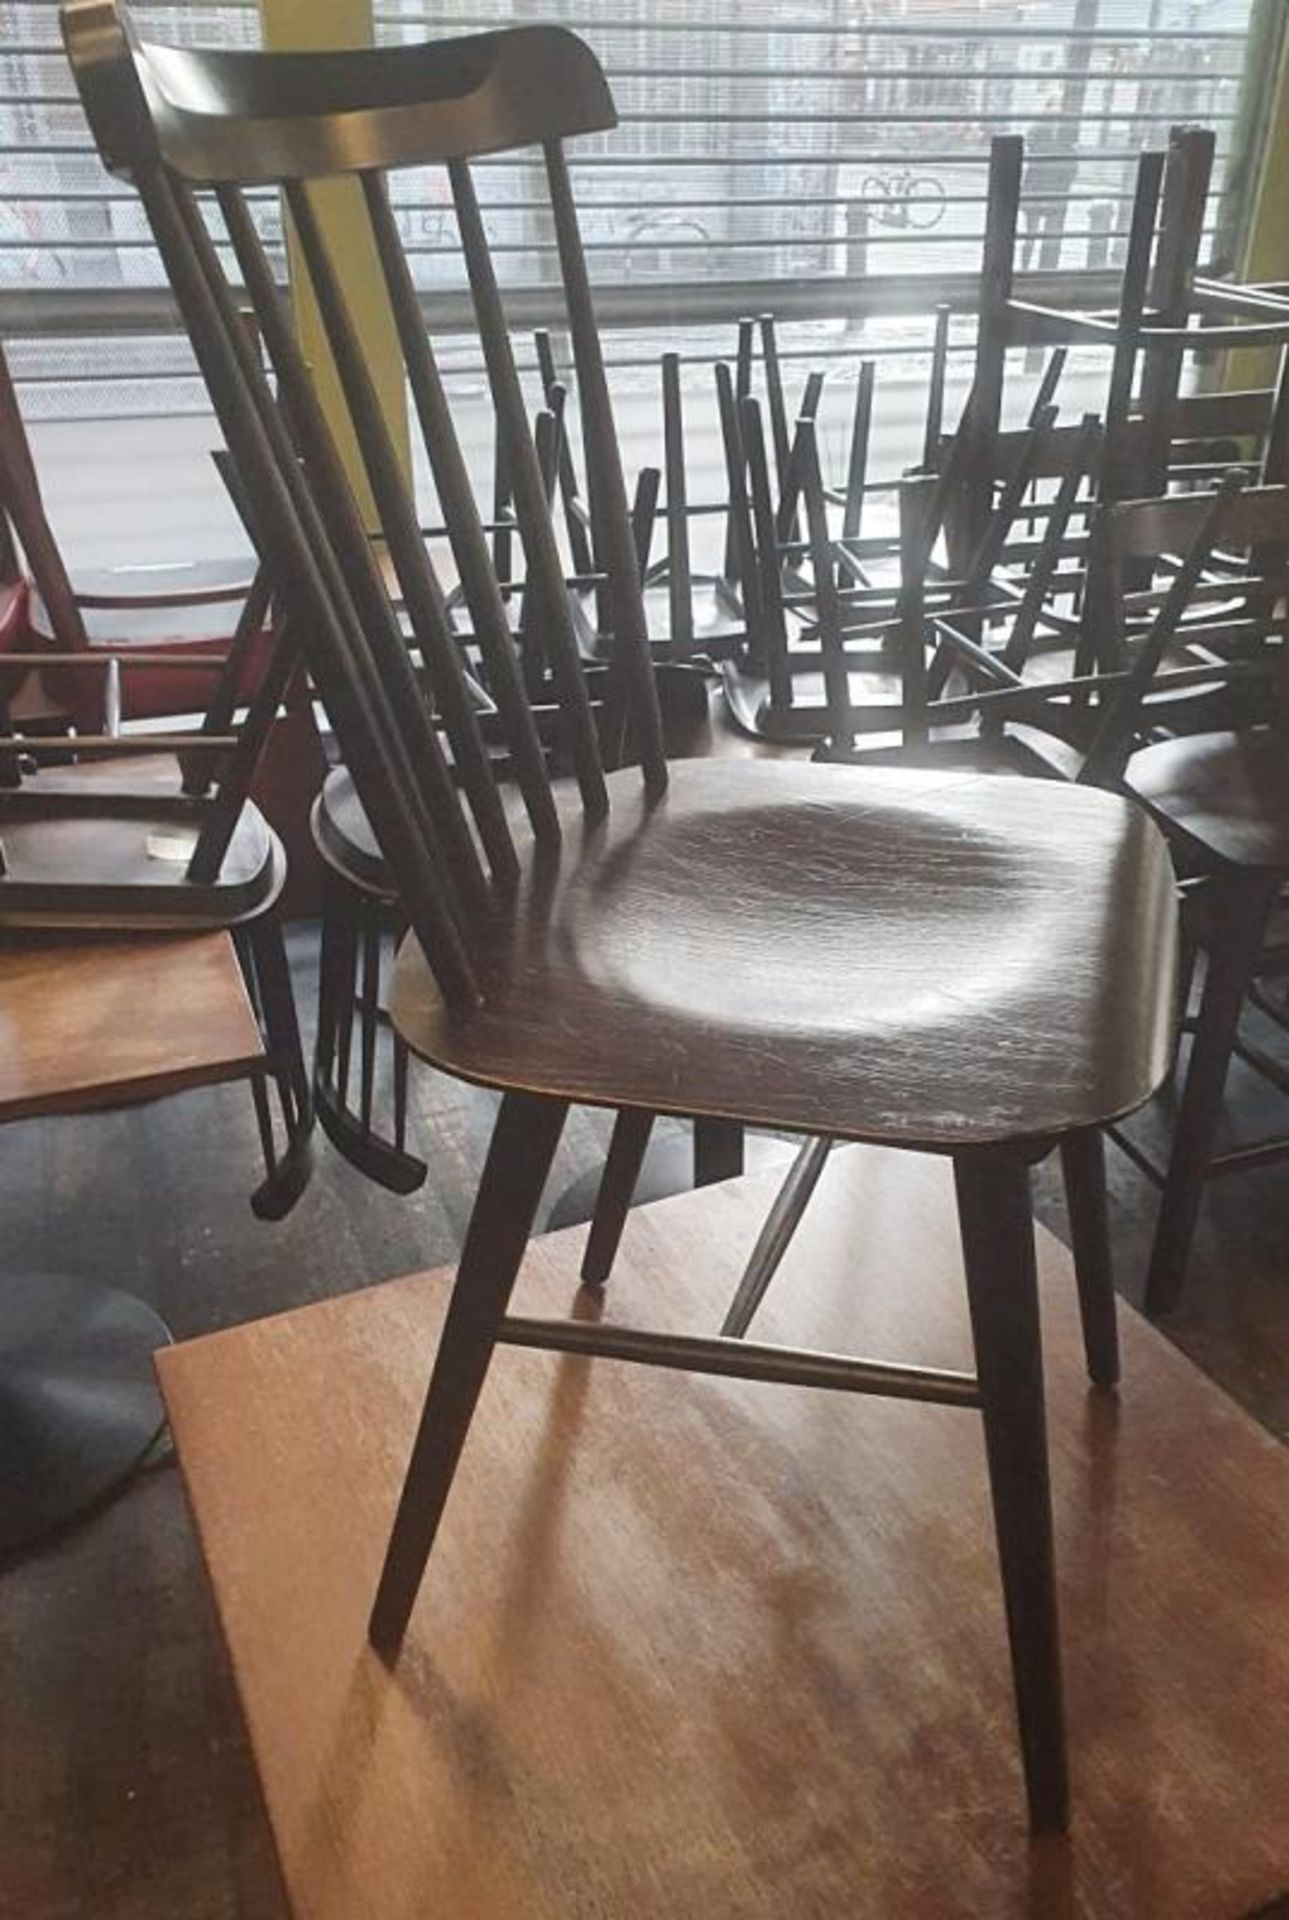 6 x Wooden Spindle Back Dining Chairs - Recently Taken From A Contemporary Caribbean Restaurant & Lo